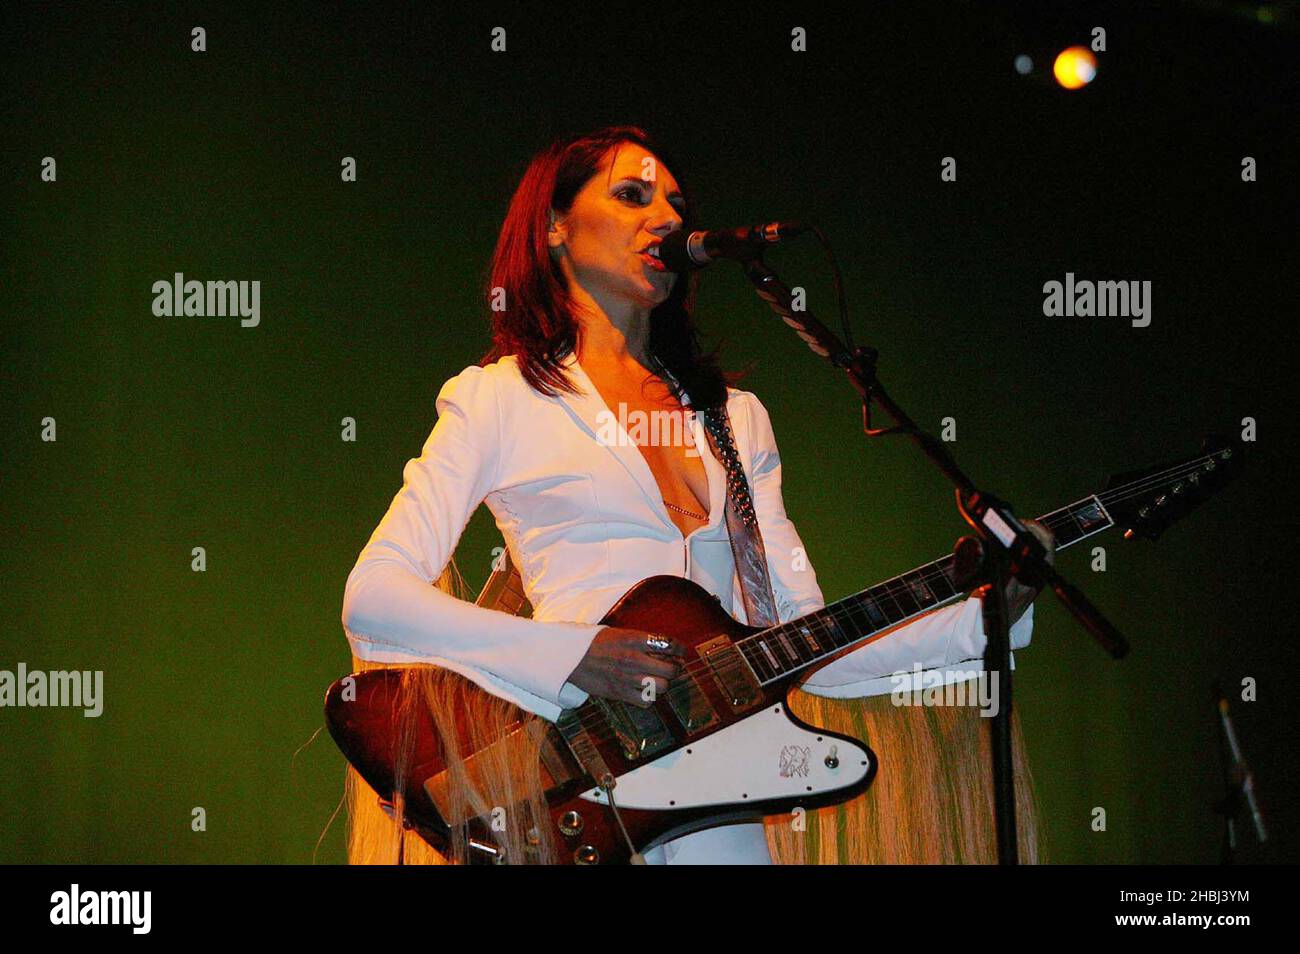 PJ Harvey performs live on stage at the Tate Modern Gallery London. Stock Photo